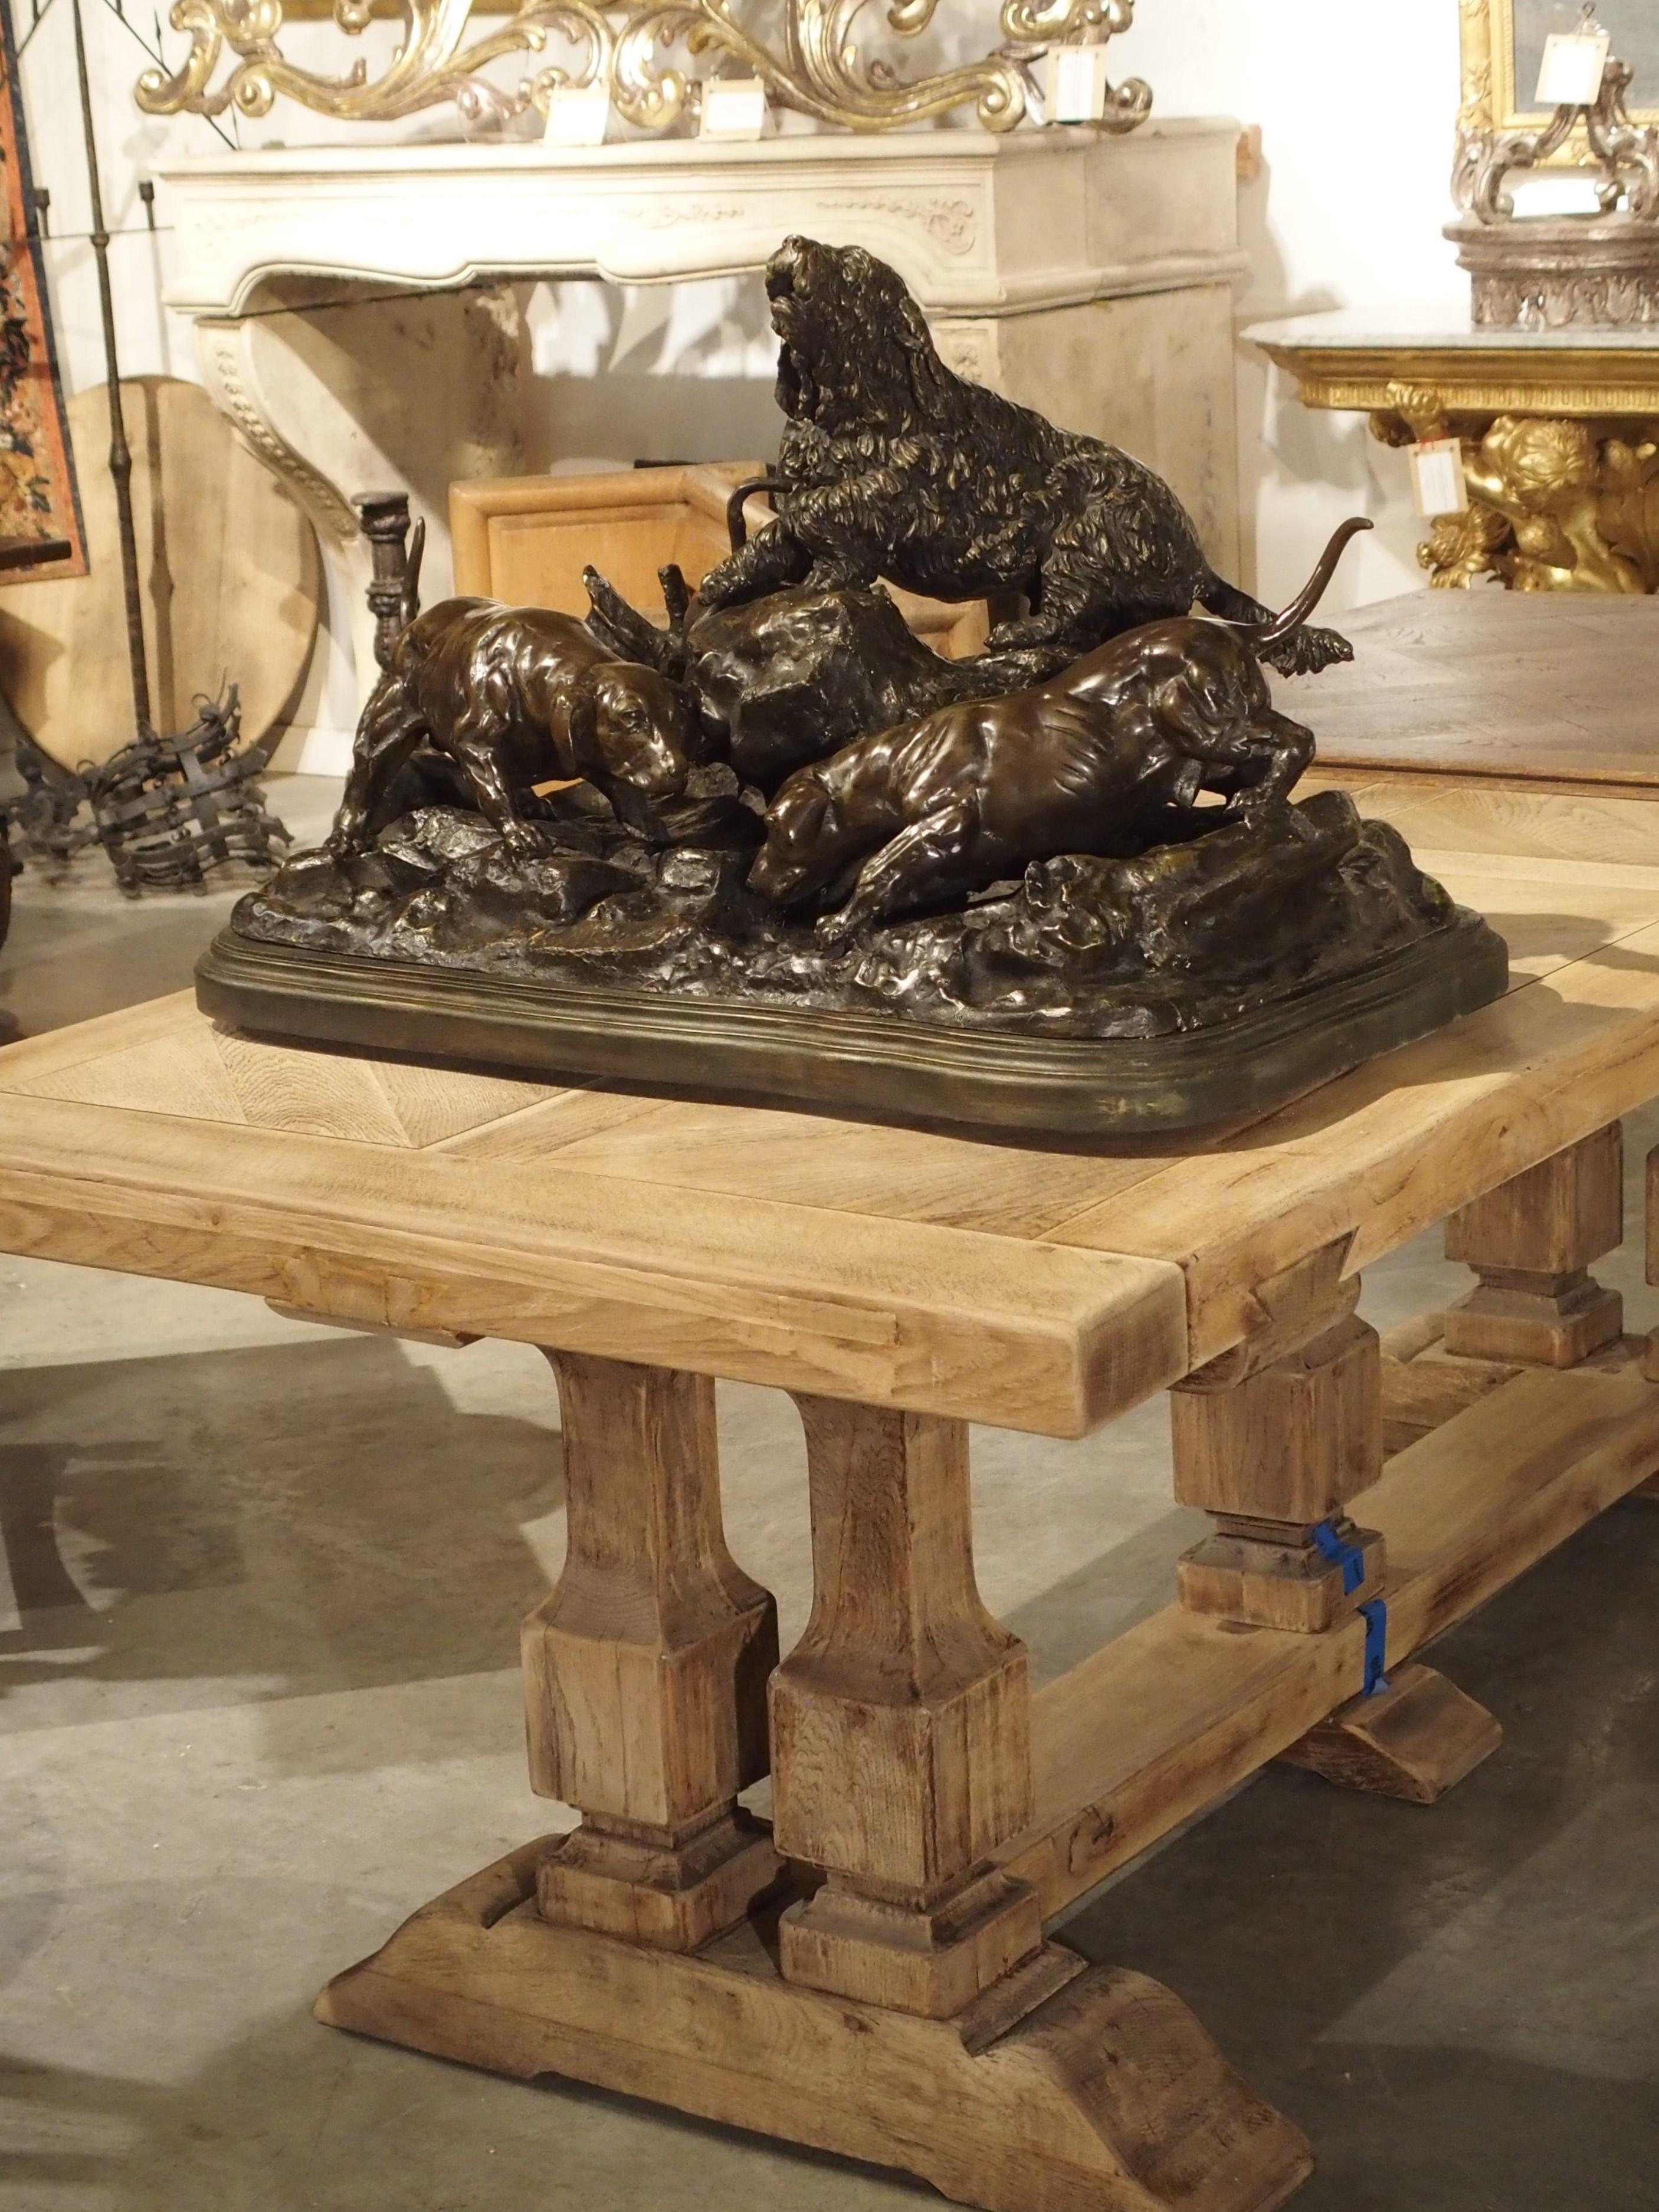 This large cast bronze sculpture of three hunting dogs sitting atop a plinth is signed Jules Moigniez, who was a prominent French animalier sculptor of the mid-late 1800s. The bronze group has a rich dark green/brown coloration, and has been mounted